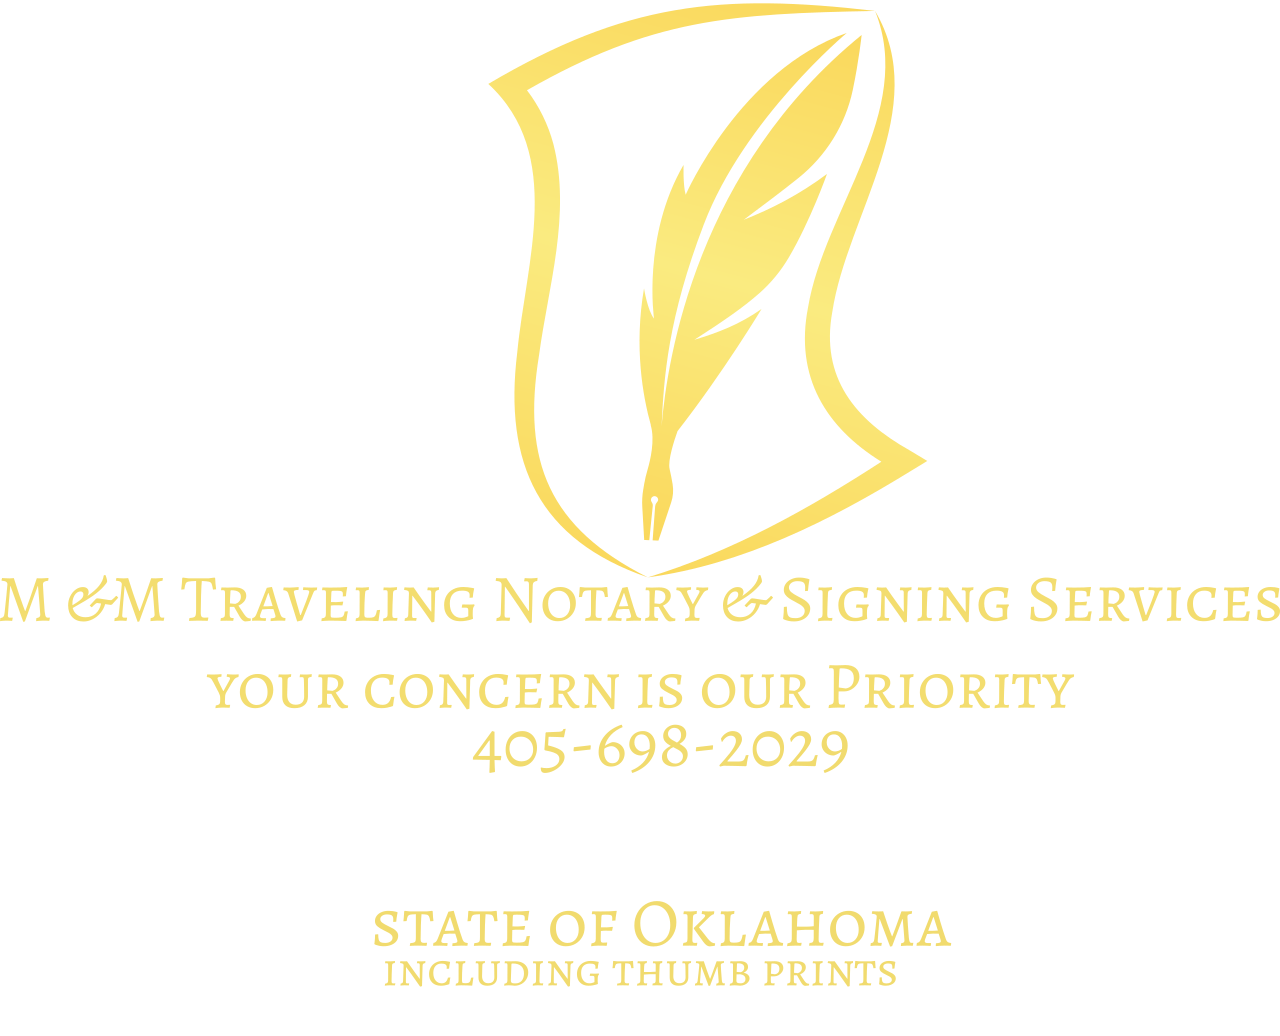 M & M Traveling Notary & Signing Services's logo